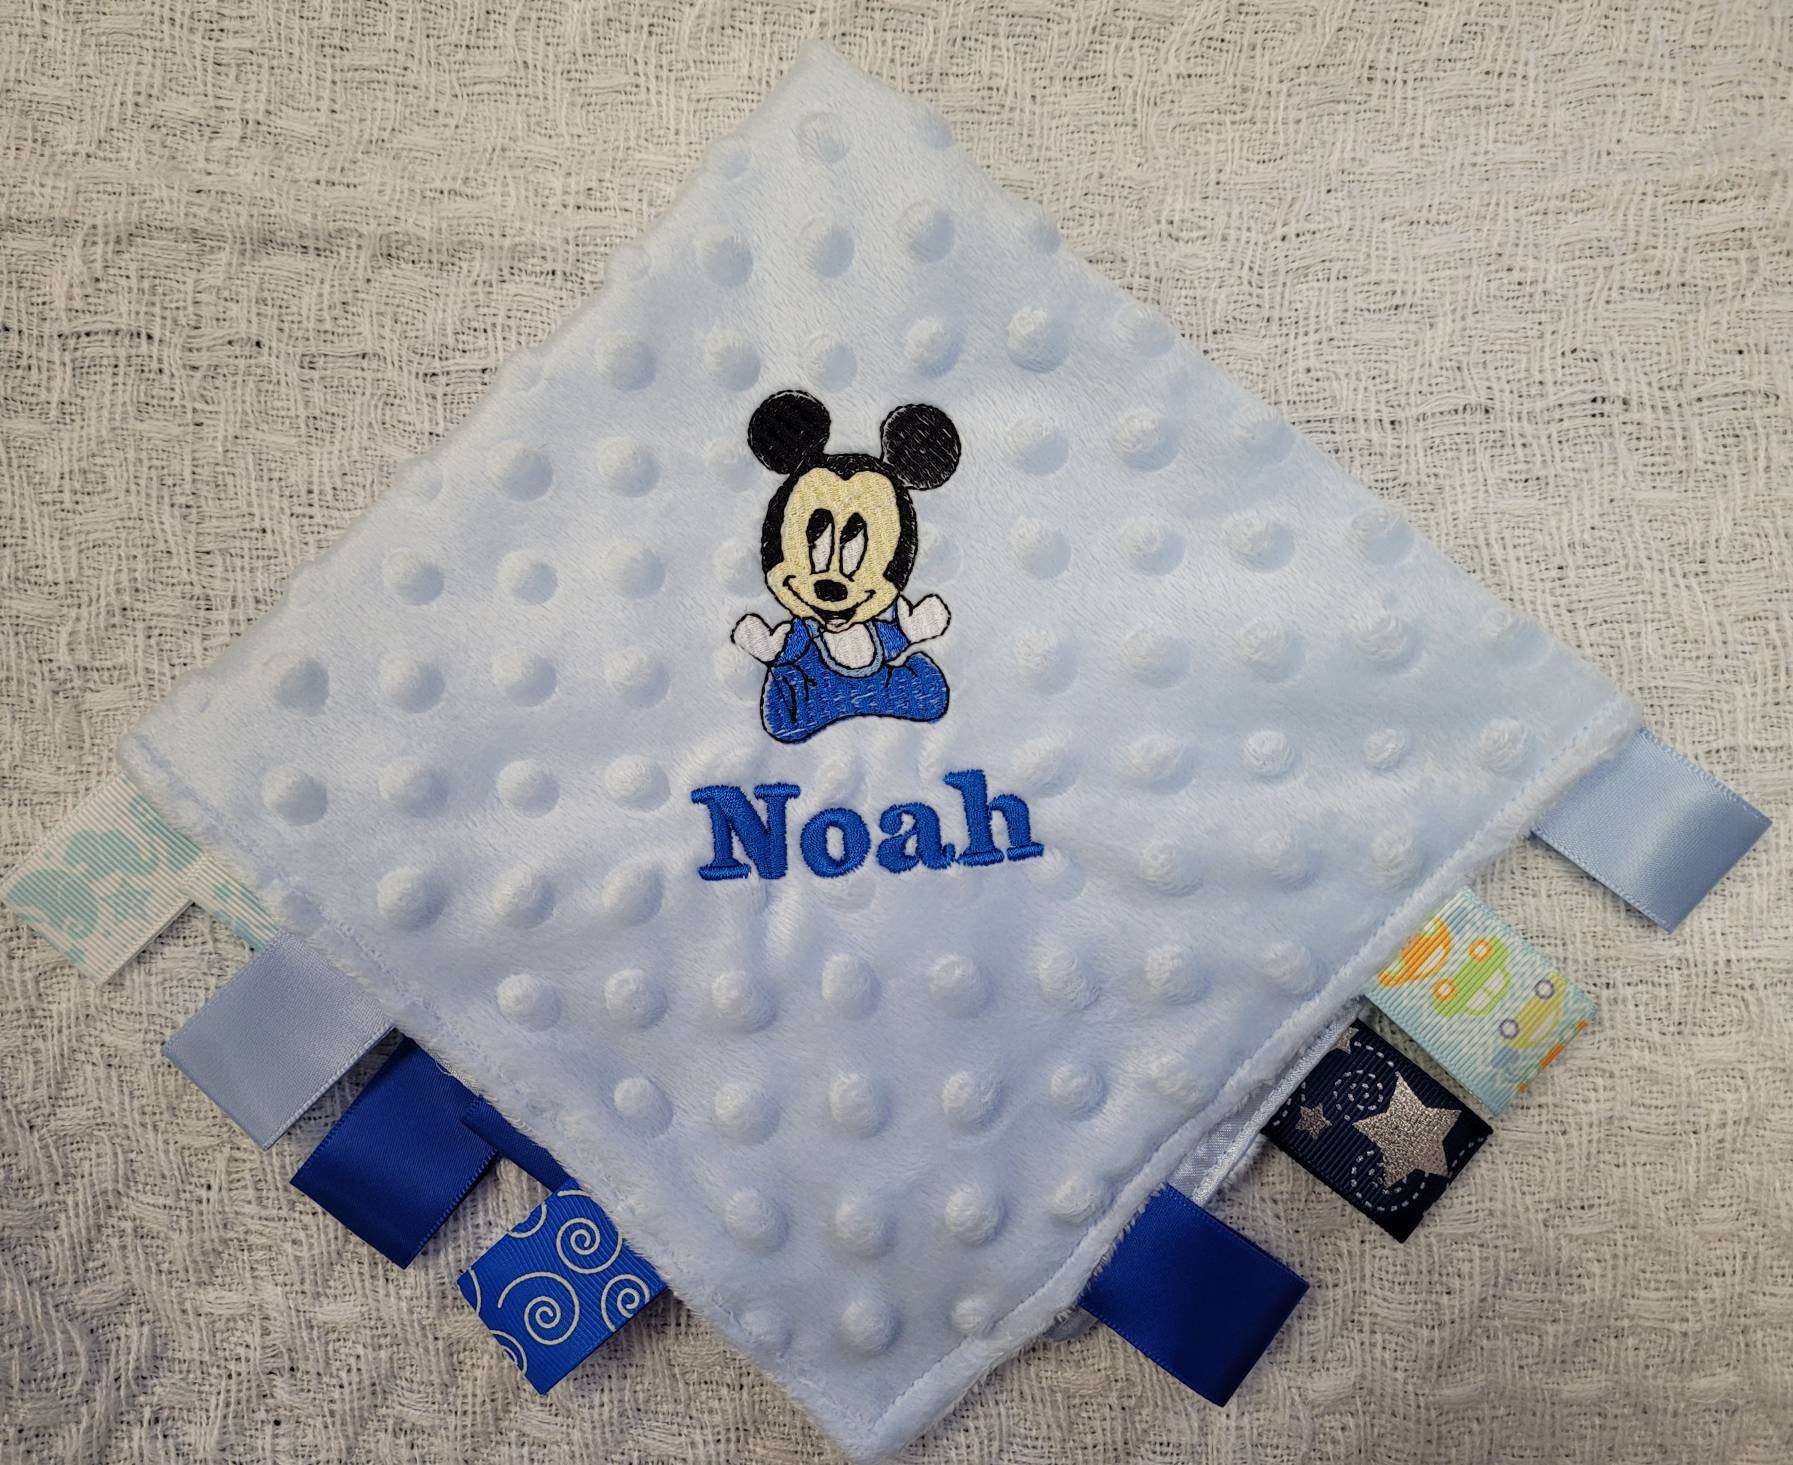 Personalised Mickey Mouse Comfort Blanket, Taggy Comforter